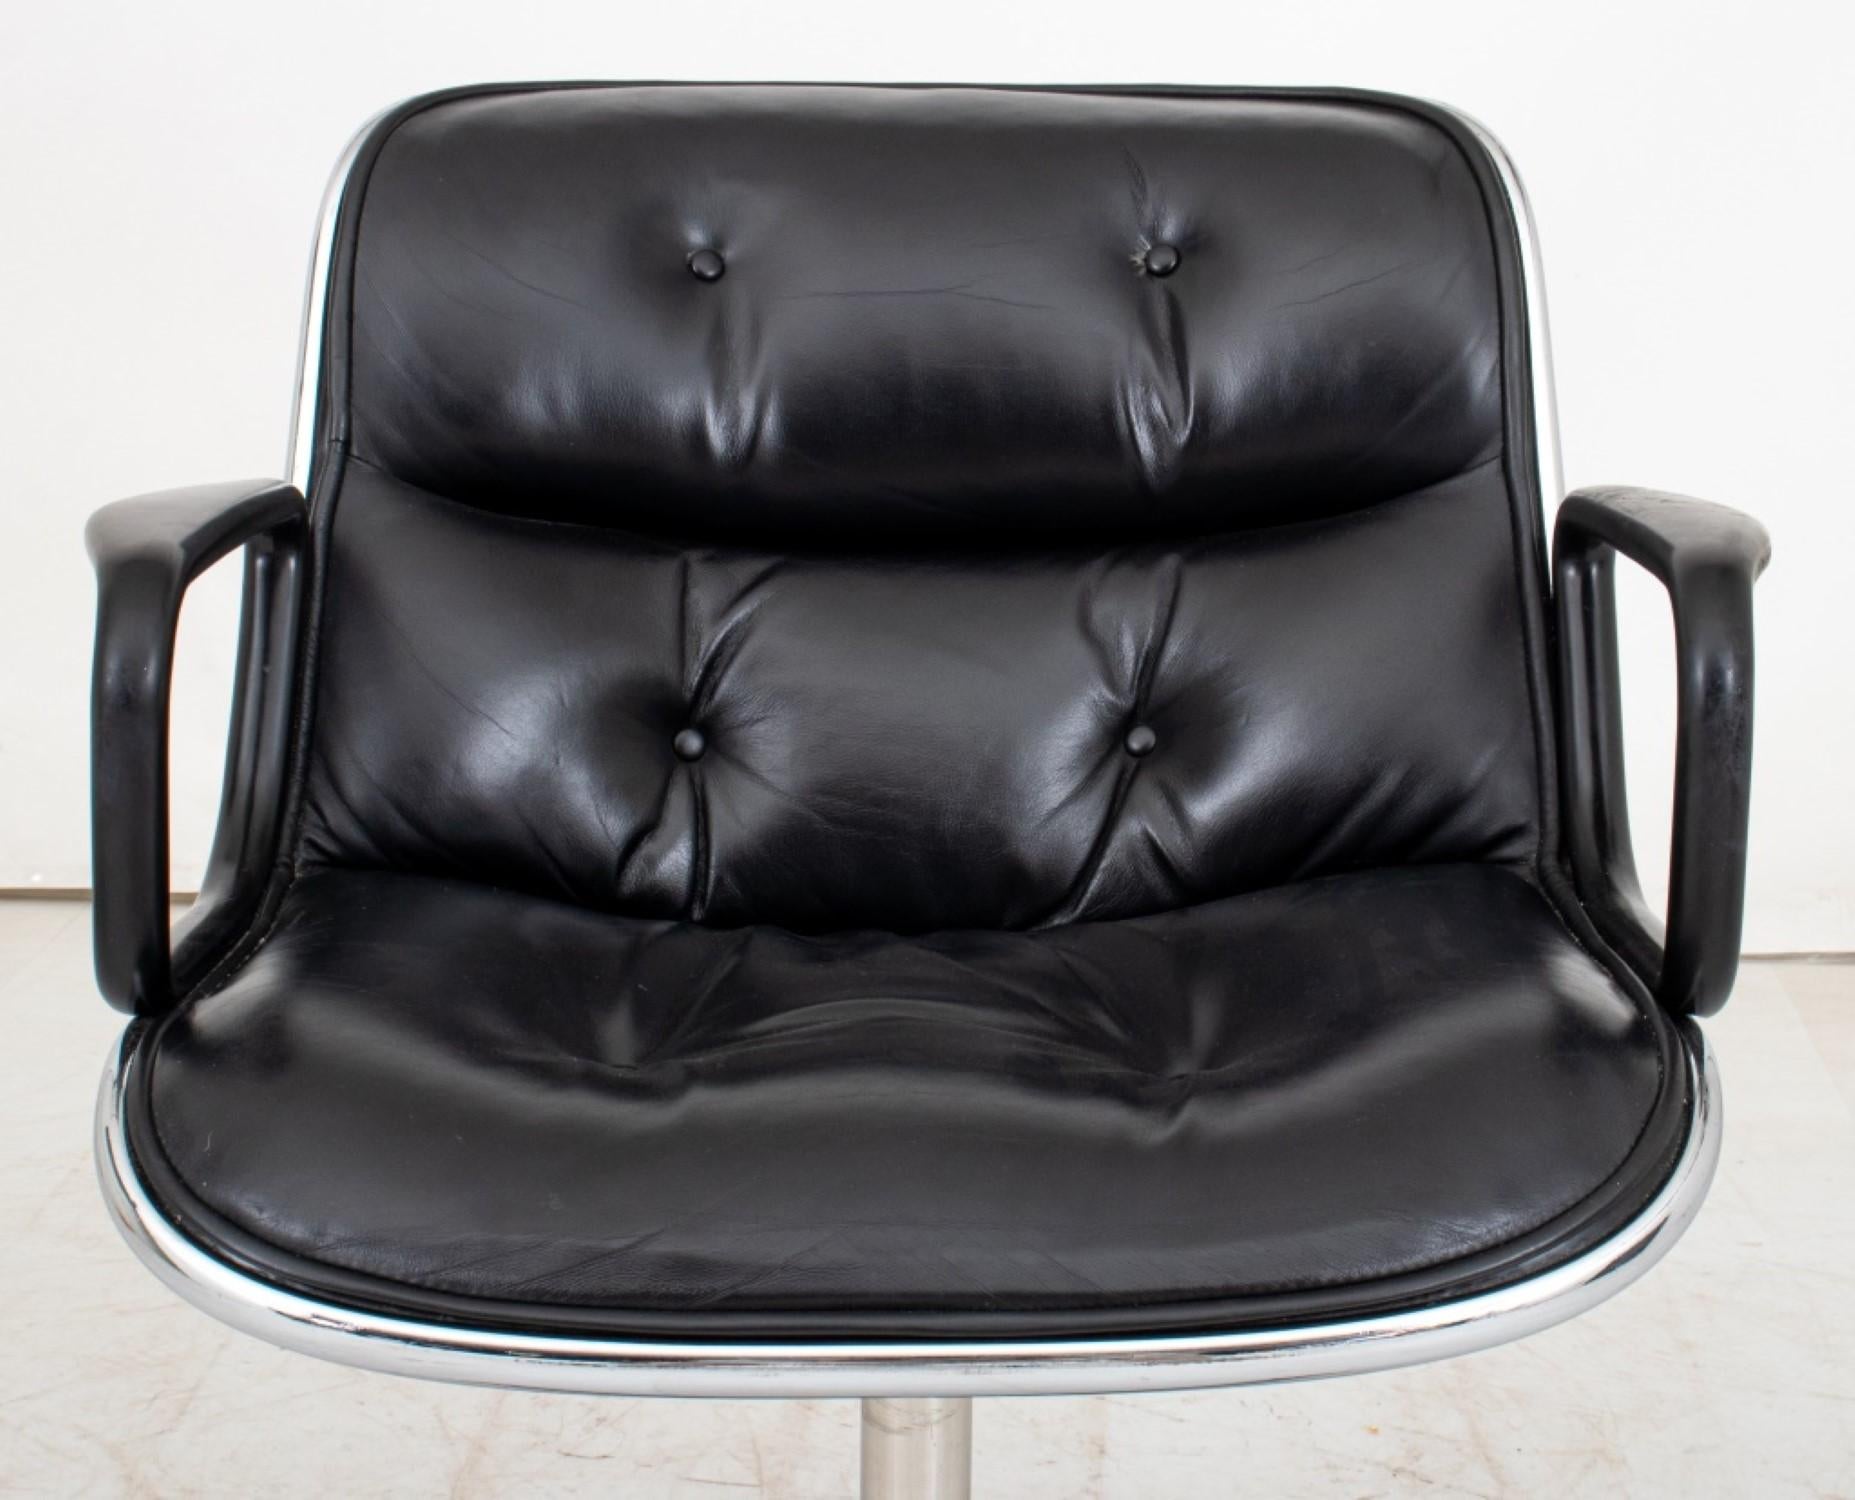 harles Pollock Executive Office Chair for Knoll International (1963)

Design: Button-tufted black leather seat and backing on a chrome base with four casters.

Dimensions: 32.25